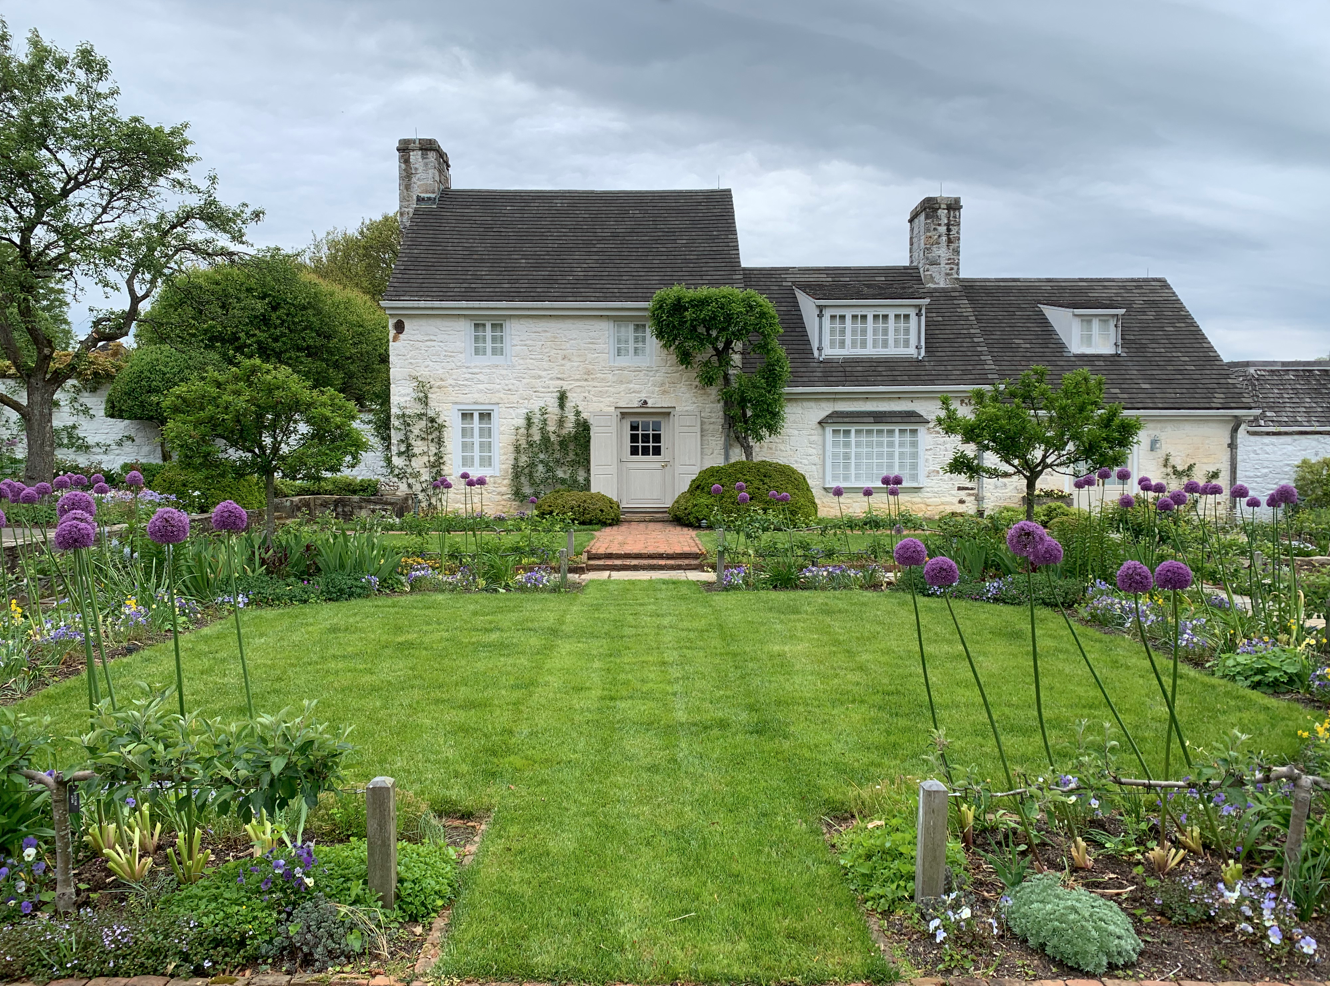  The Square Garden is formal in its symmetry and layout. Annual rye grass planted in the early spring helps set off the planting design and the charming guest house where Jackie Onassis and her family often stayed. 